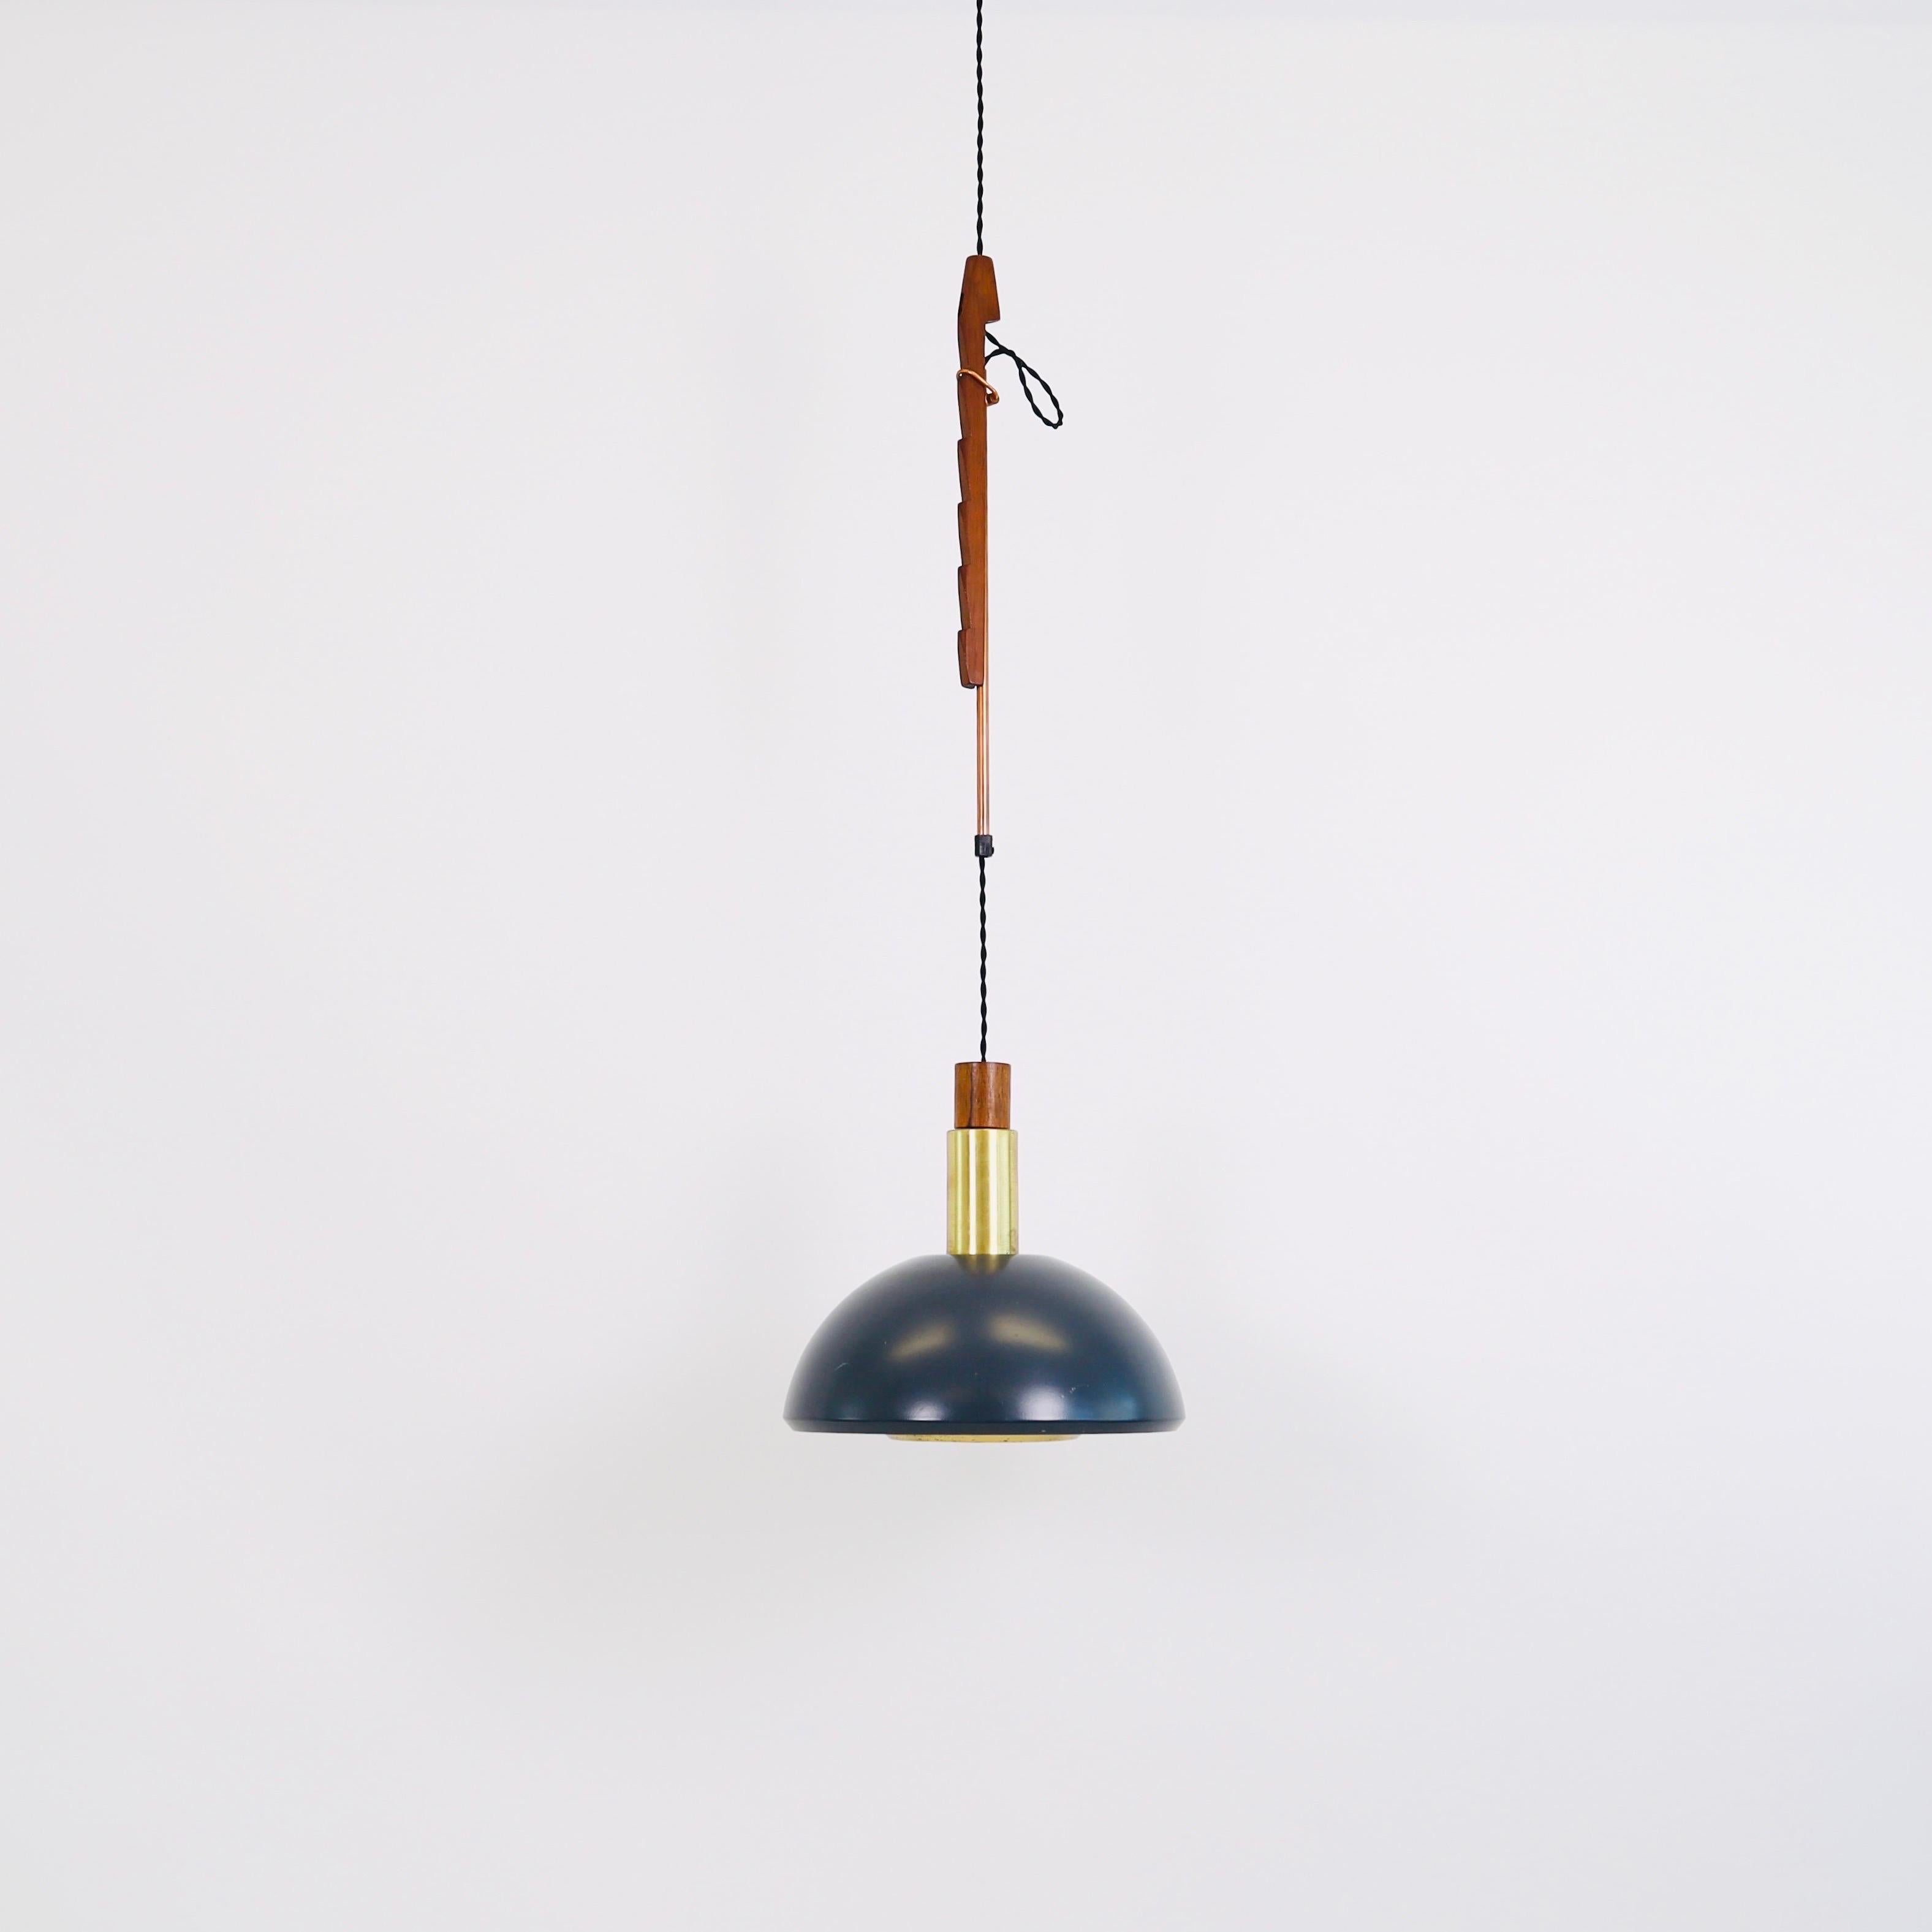 A pendant light designed Svend Aage Holm Sørensen in the 1960s. This rare piece with its teak wood suspension is a trademark of the Danish designer. 

* A gray metal pendant light with brass and teak-wood details and suspension in teak-wood allowing